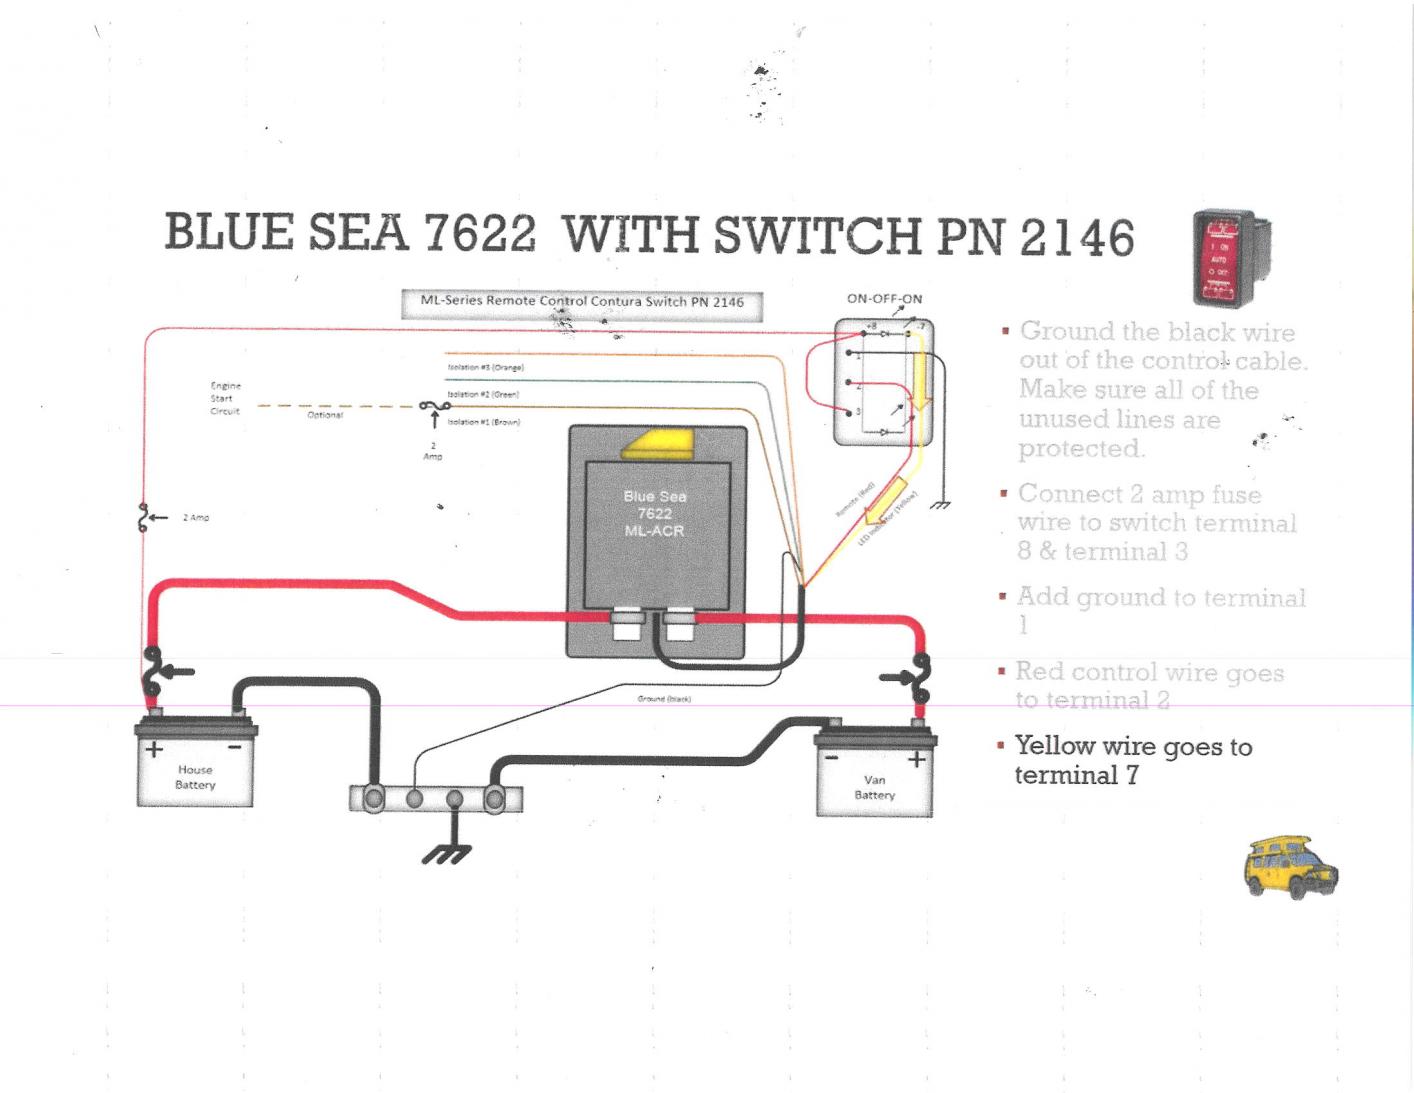 Blue Sea 7622 with 2146 Switch
Scalf created document